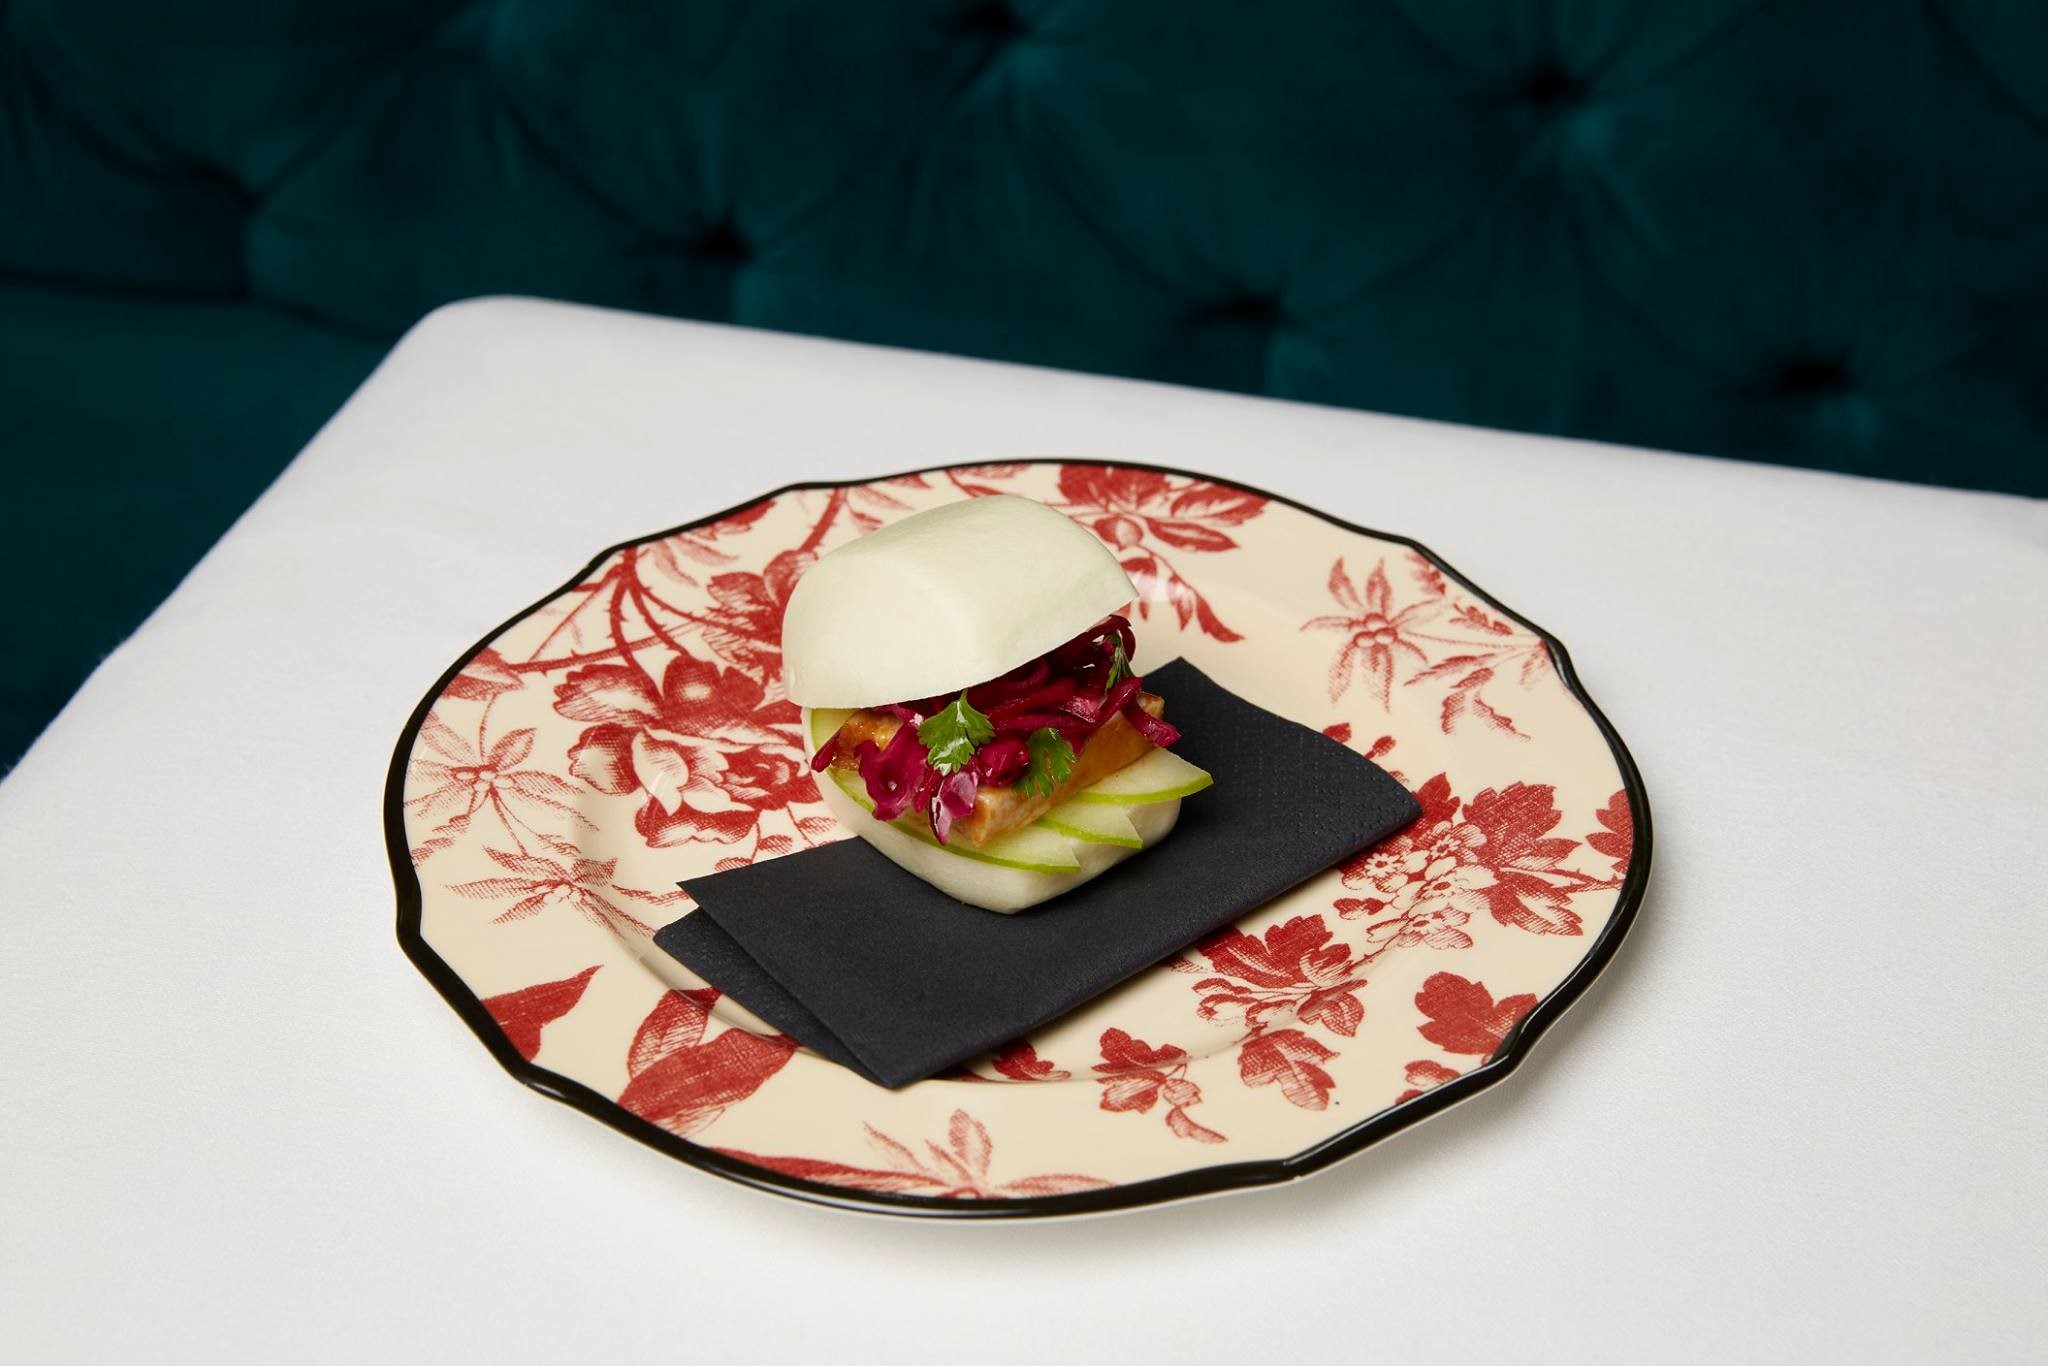 The Gucci Dream: Get Ready For Date Night with Gucci’s First-Ever Pop-up Restaurant 